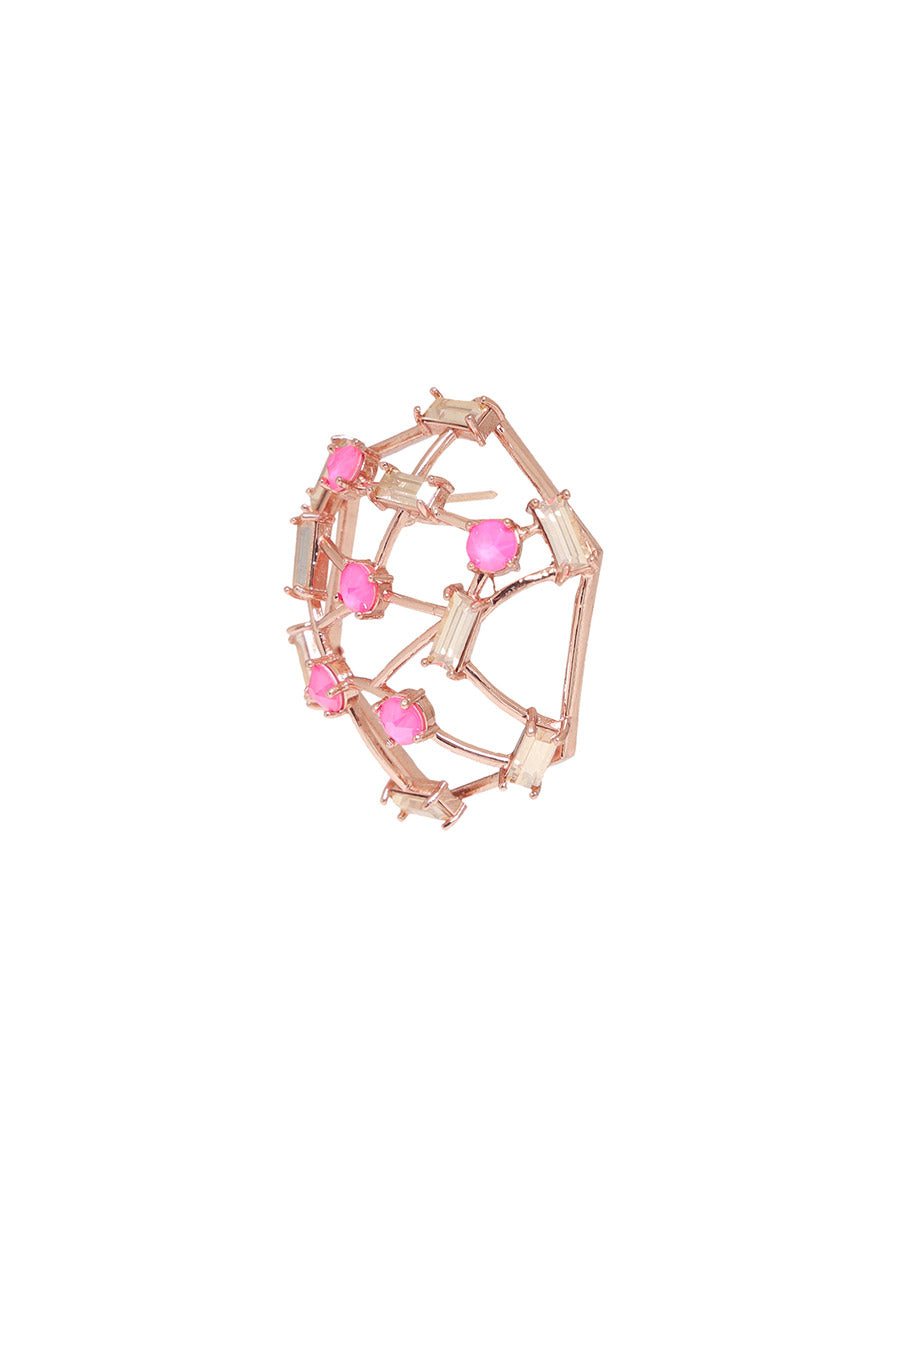 Candy Floss - Pink Swarovski Cage Stud Earrings